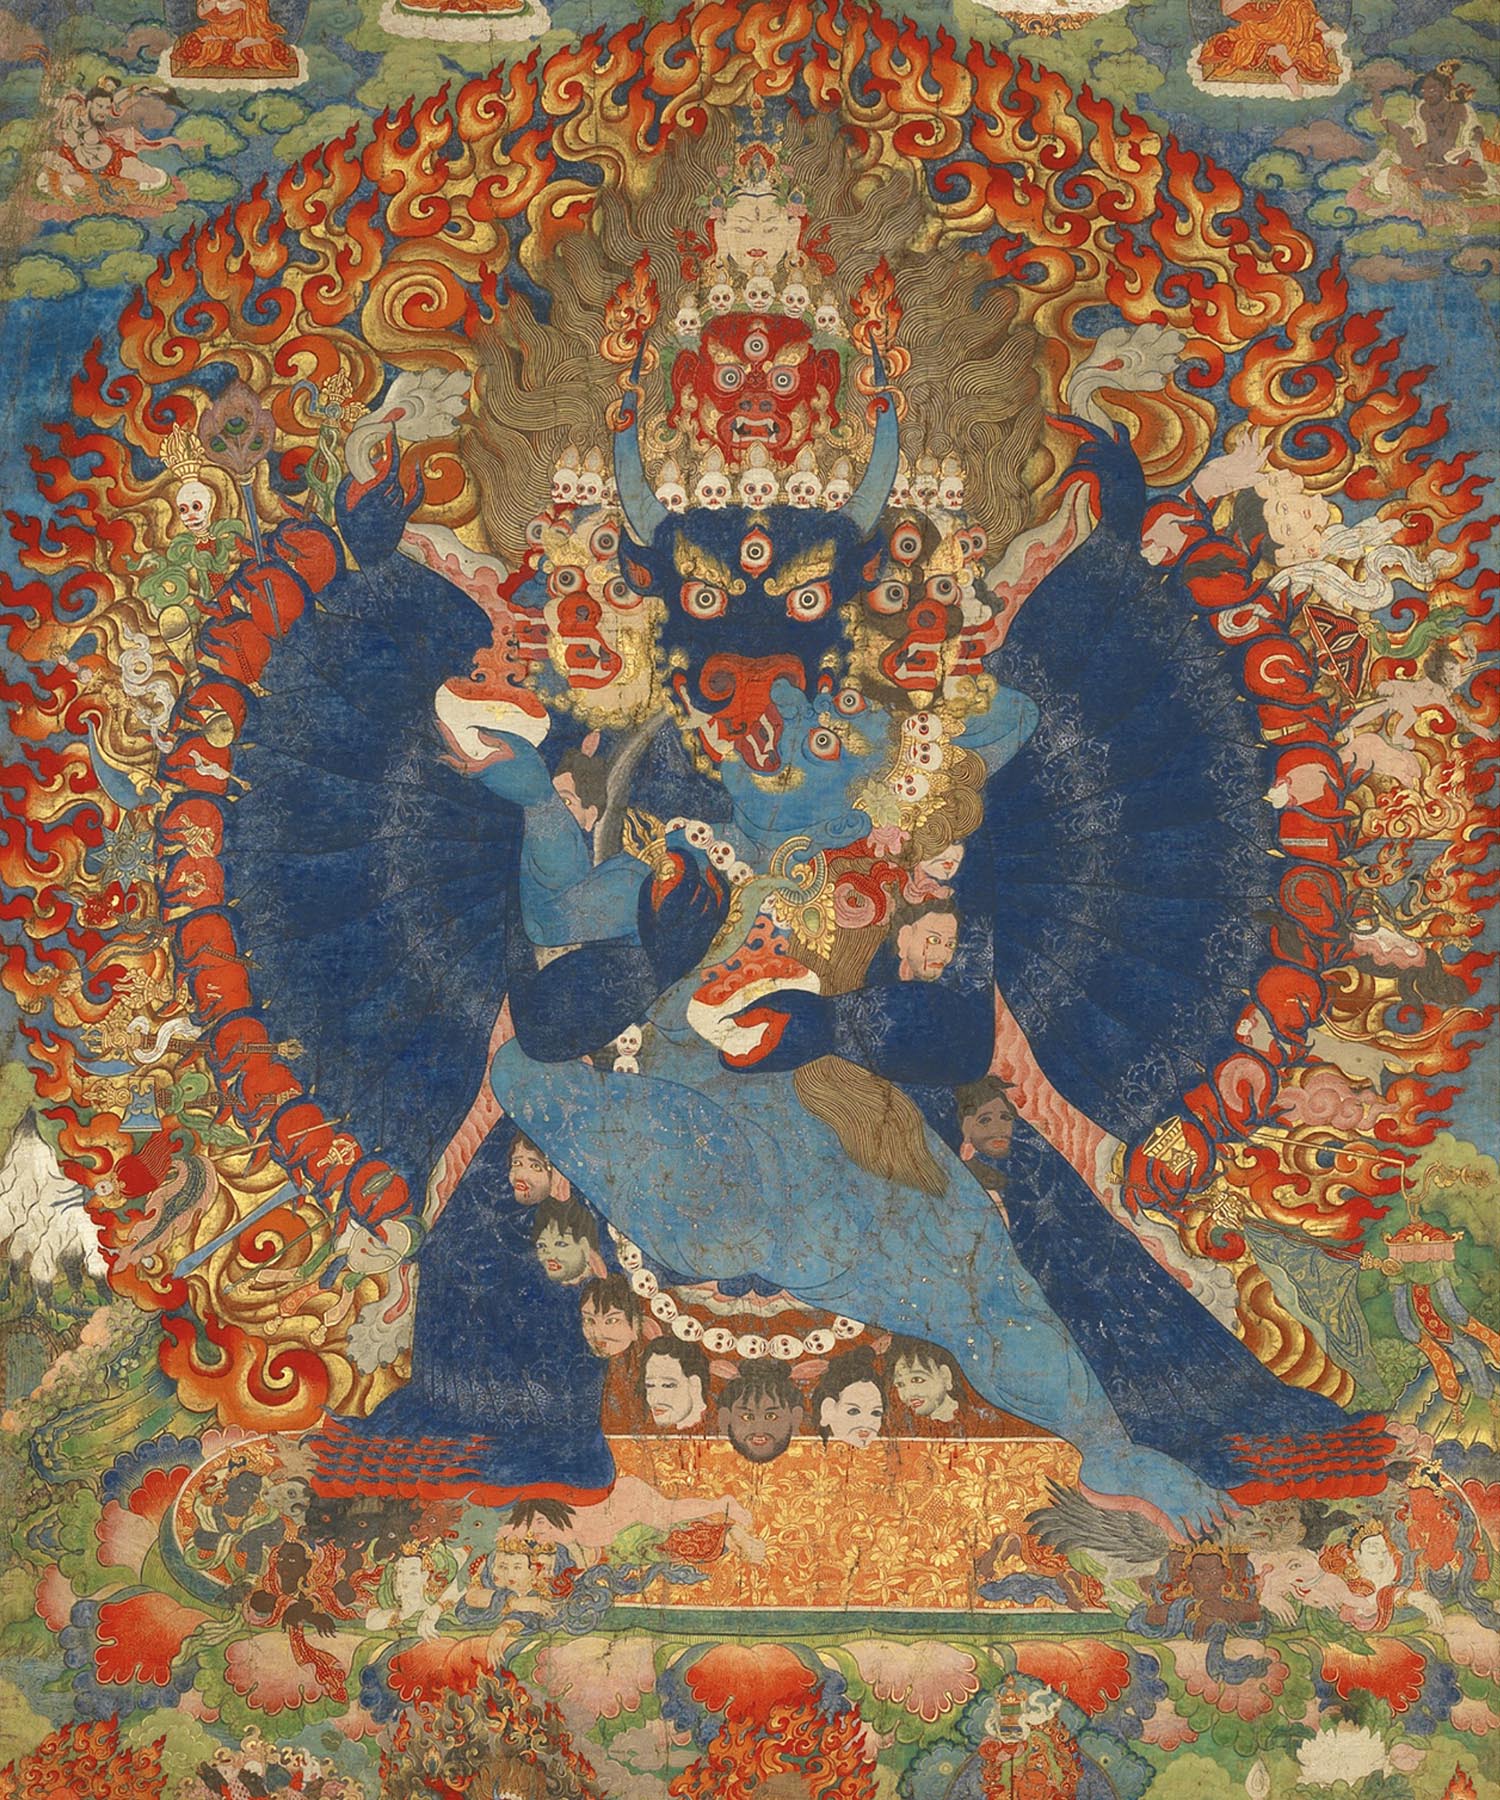 A Buddhist thangka with a central image of Vajrabhairava encircled by a halo of flames